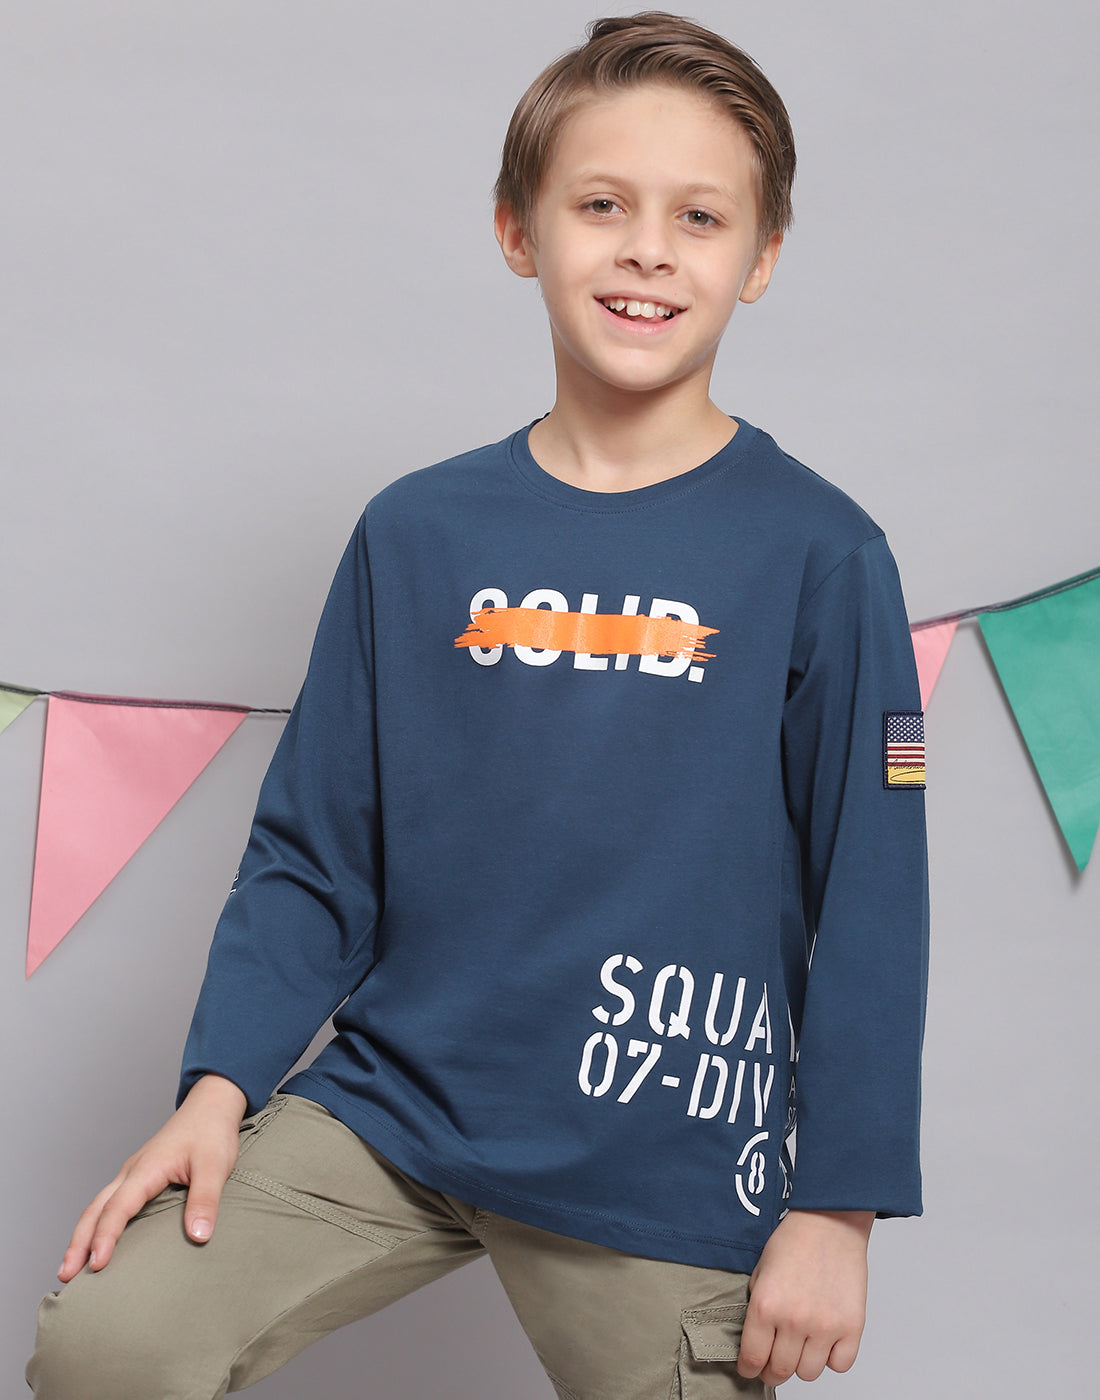 Boys Teal Blue Printed Round Neck Full Sleeve T-Shirts